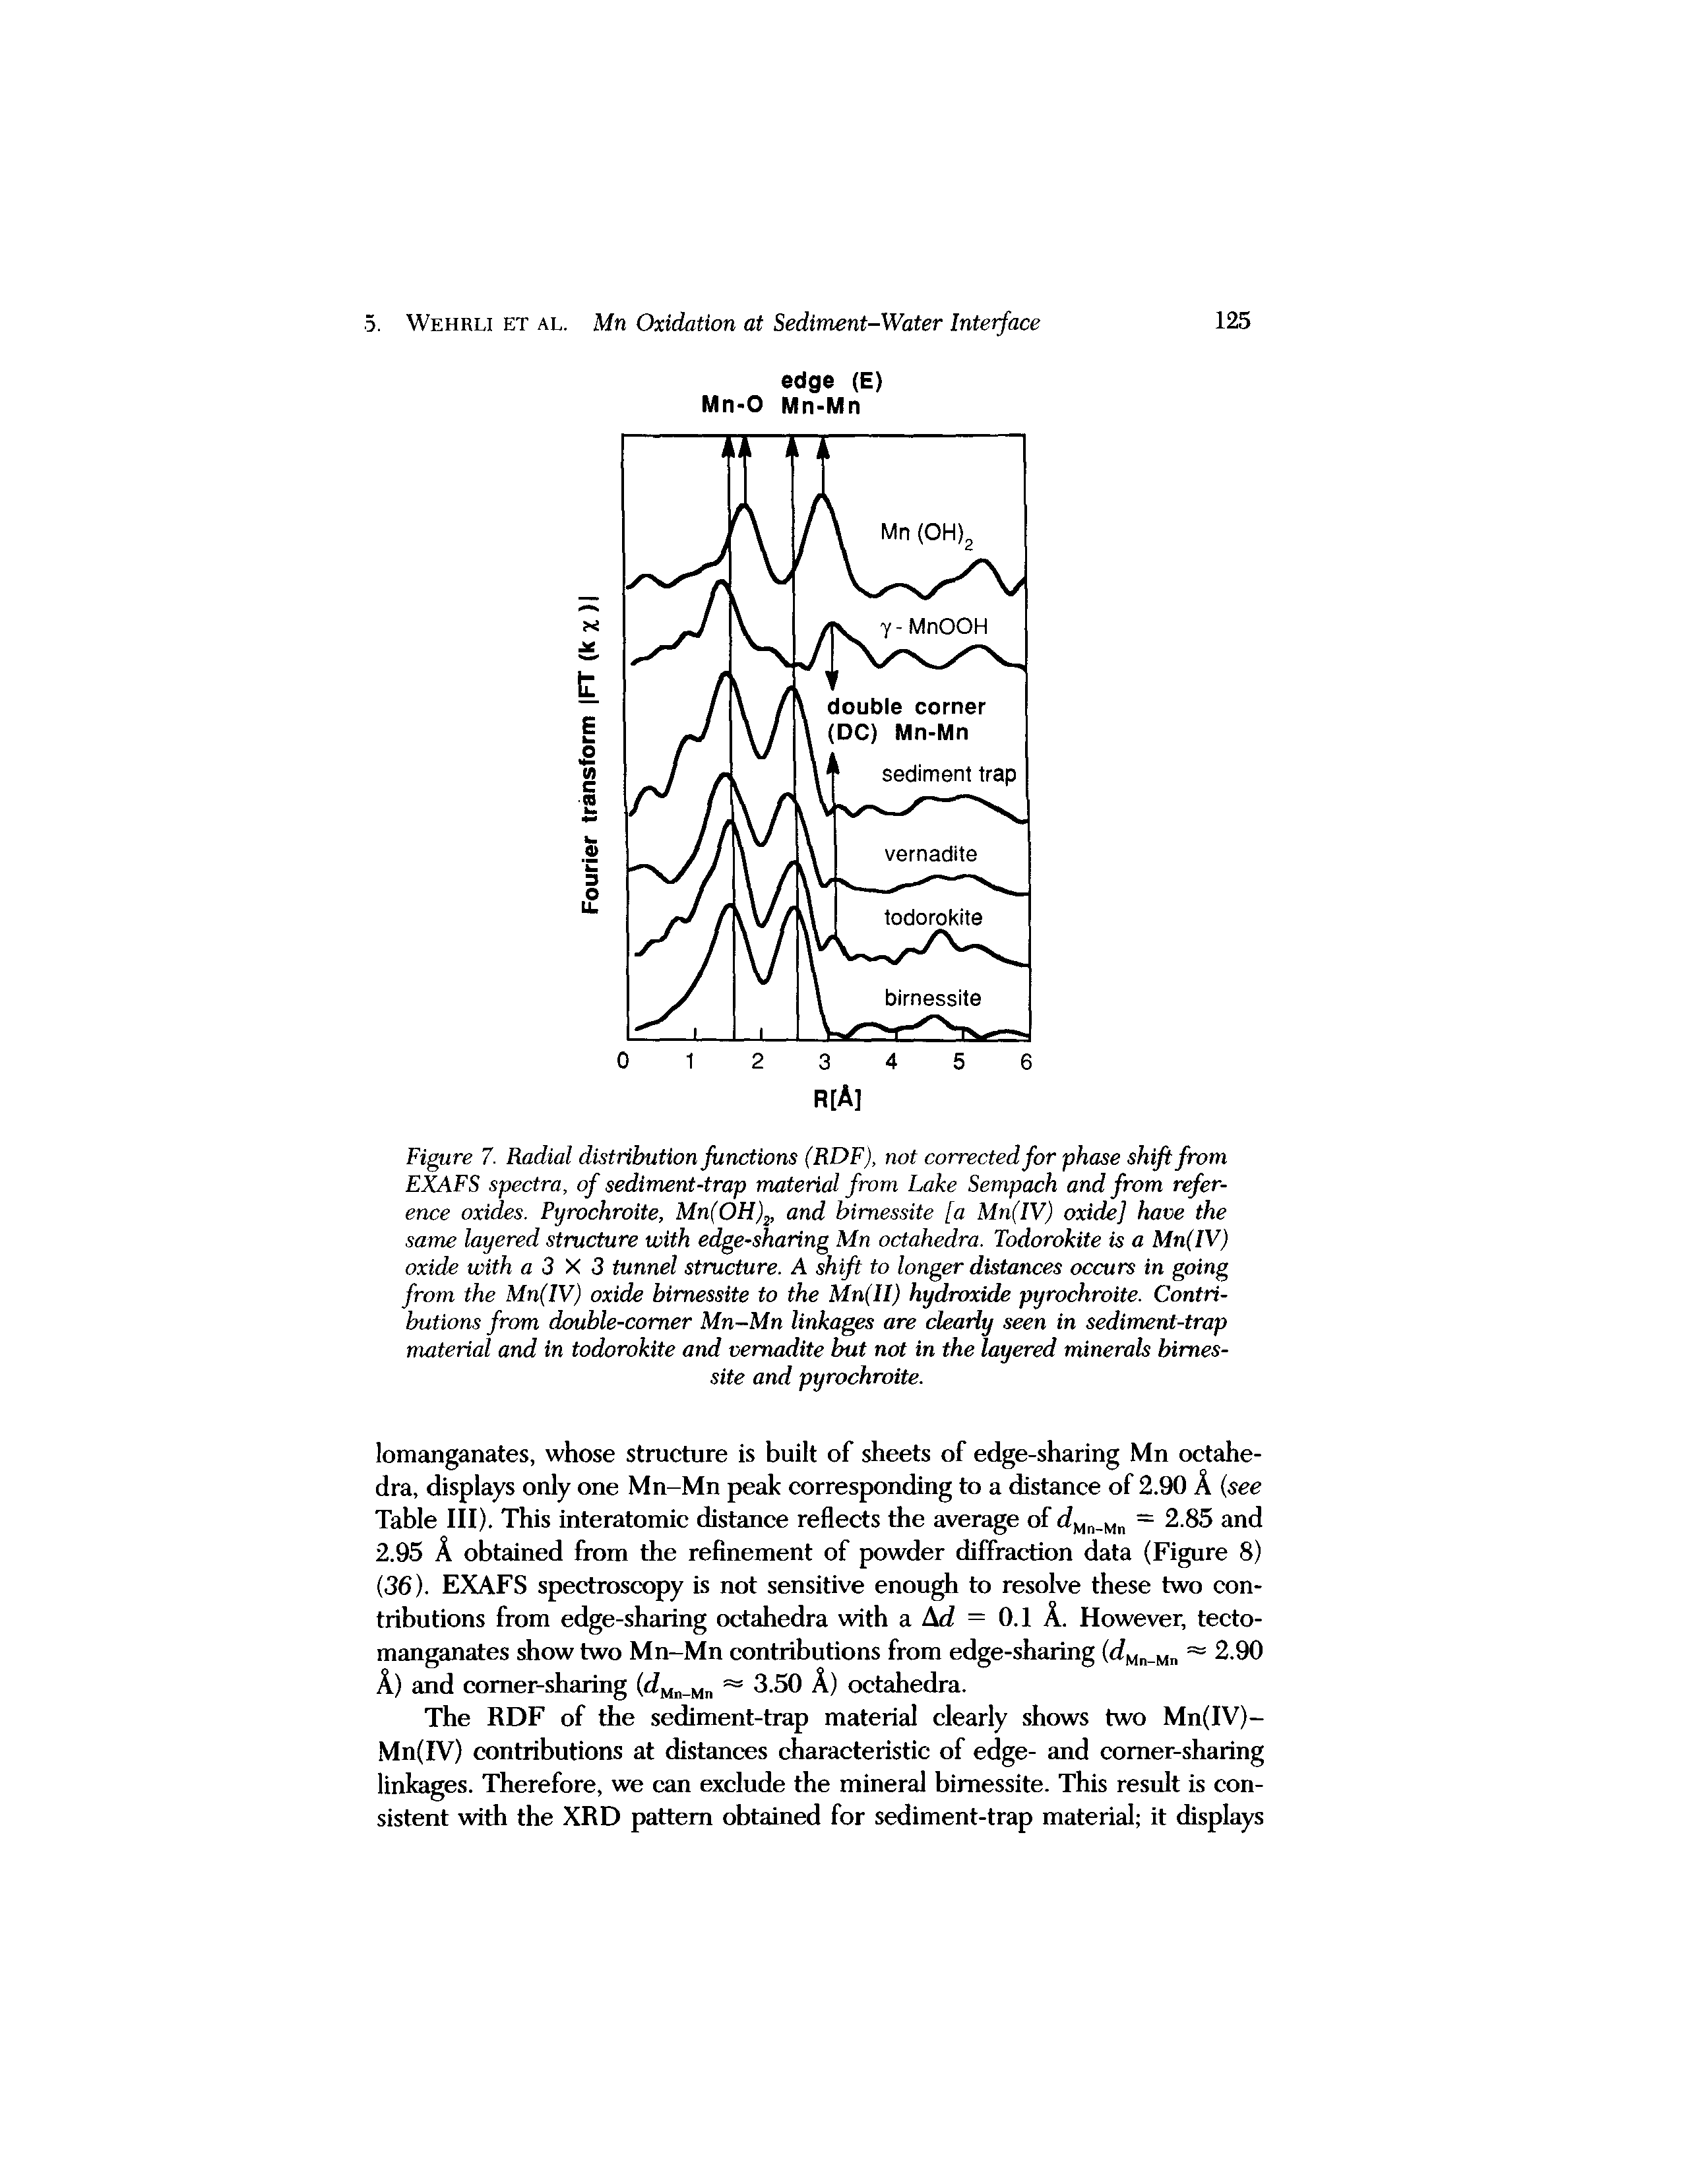 Figure 7. Radial distribution functions (RDF), not corrected for phase shift from EXAFS spectra, of sediment-trap material from Lake Sempach and from reference oxides. Pyrochroite, Mn(OH)-, and bimessite [a Mn(IV) oxide] have the same layered structure with edge-sharing Mn octahedra. Todorokite is a Mn(IV) oxide with a 3 X 3 tunnel structure. A shift to longer distances occurs in going from the Mn(IV) oxide bimessite to the Mn(II) hydroxide pyrochroite. Contributions from double-comer Mn-Mn linkages are clearly seen in sediment-trap material and in todorokite and vemadite but not in the layered minerals bimessite and pyrochroite.